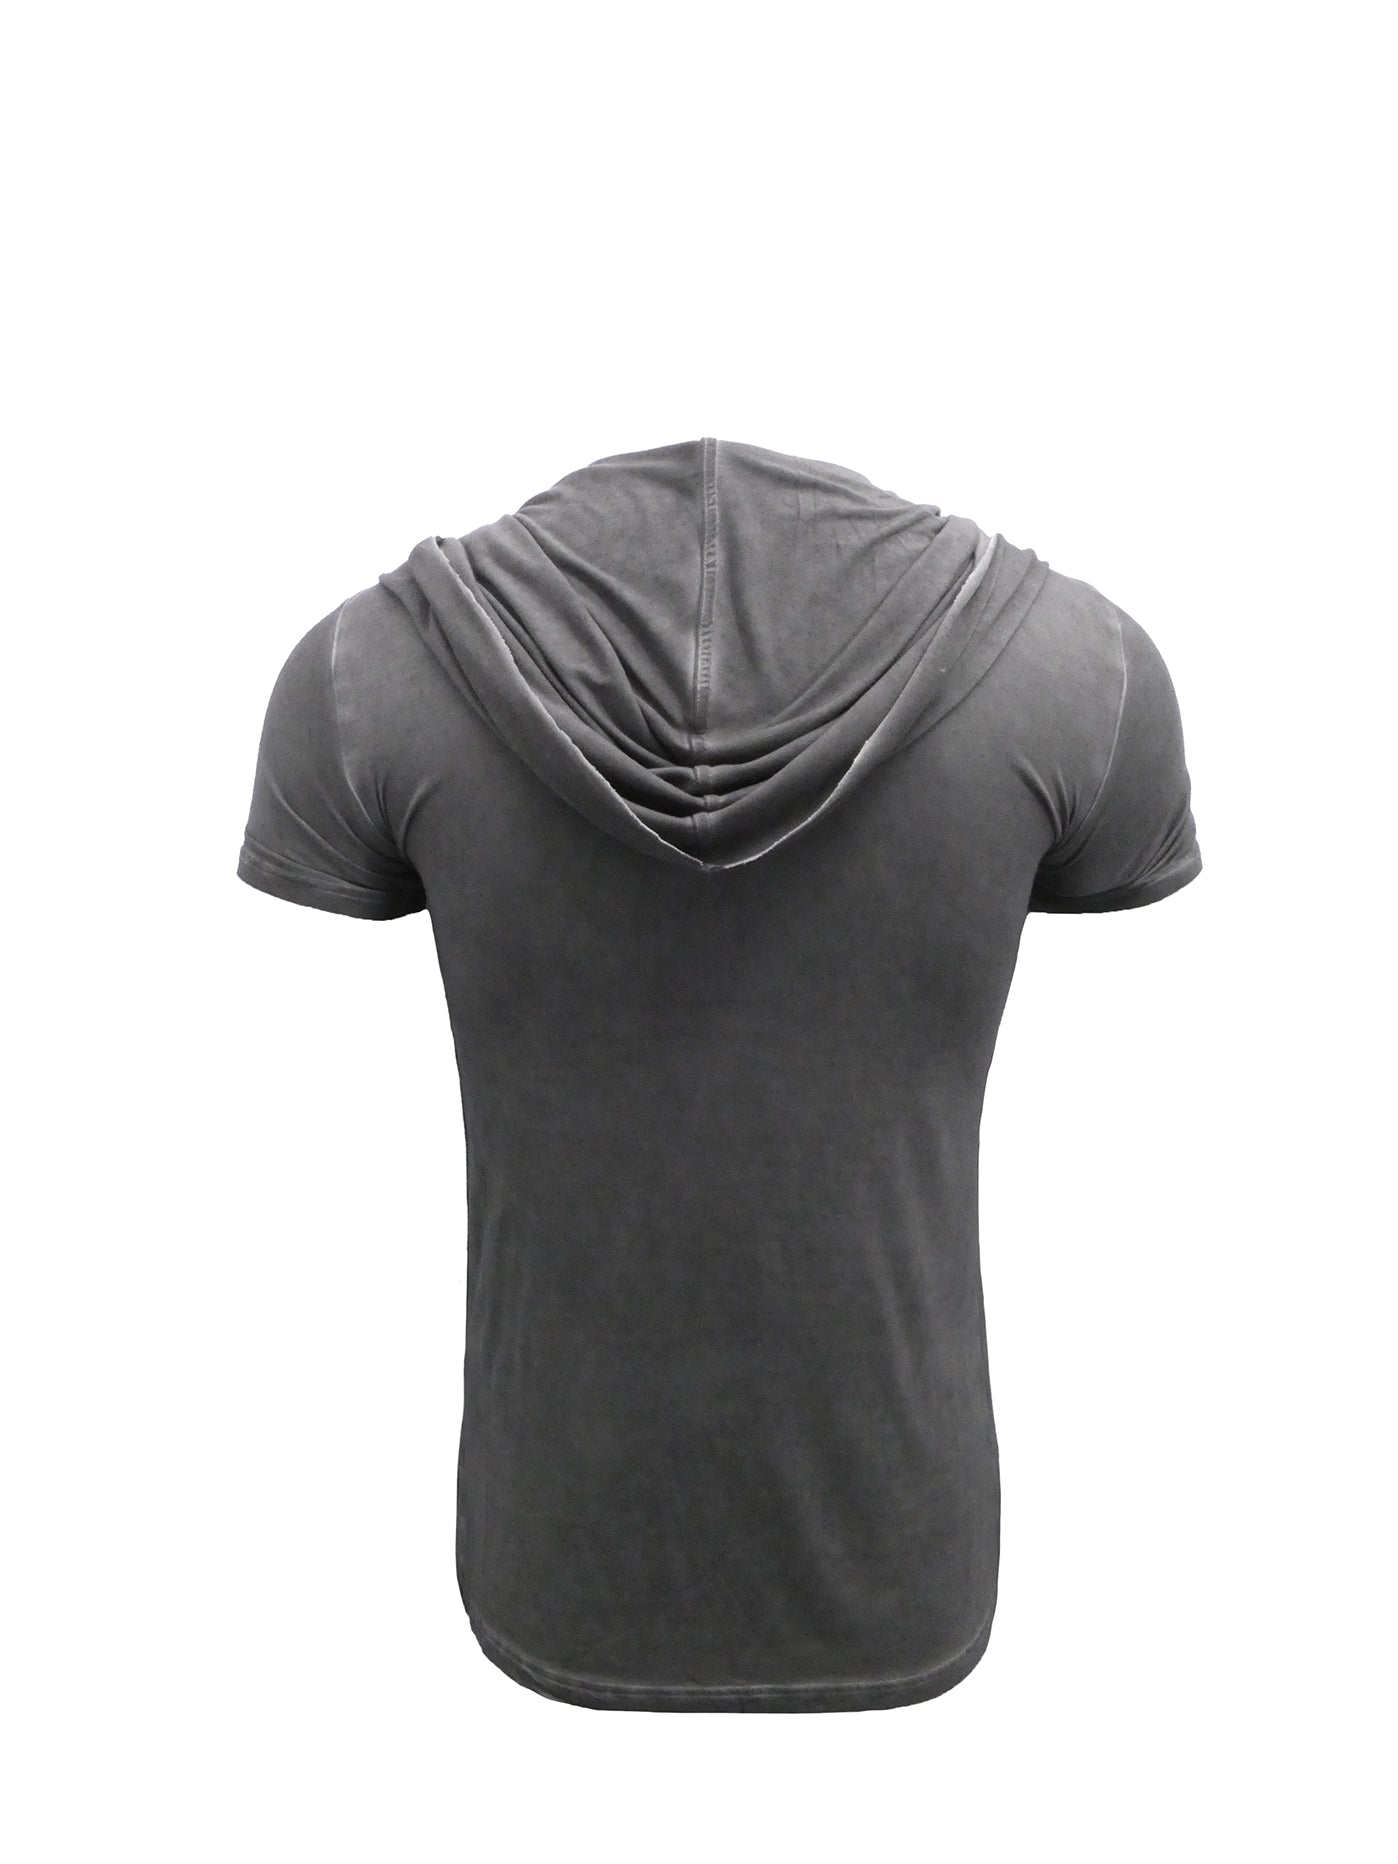 SHADOW WATERFALL T-SHIRT WITH DRAPING